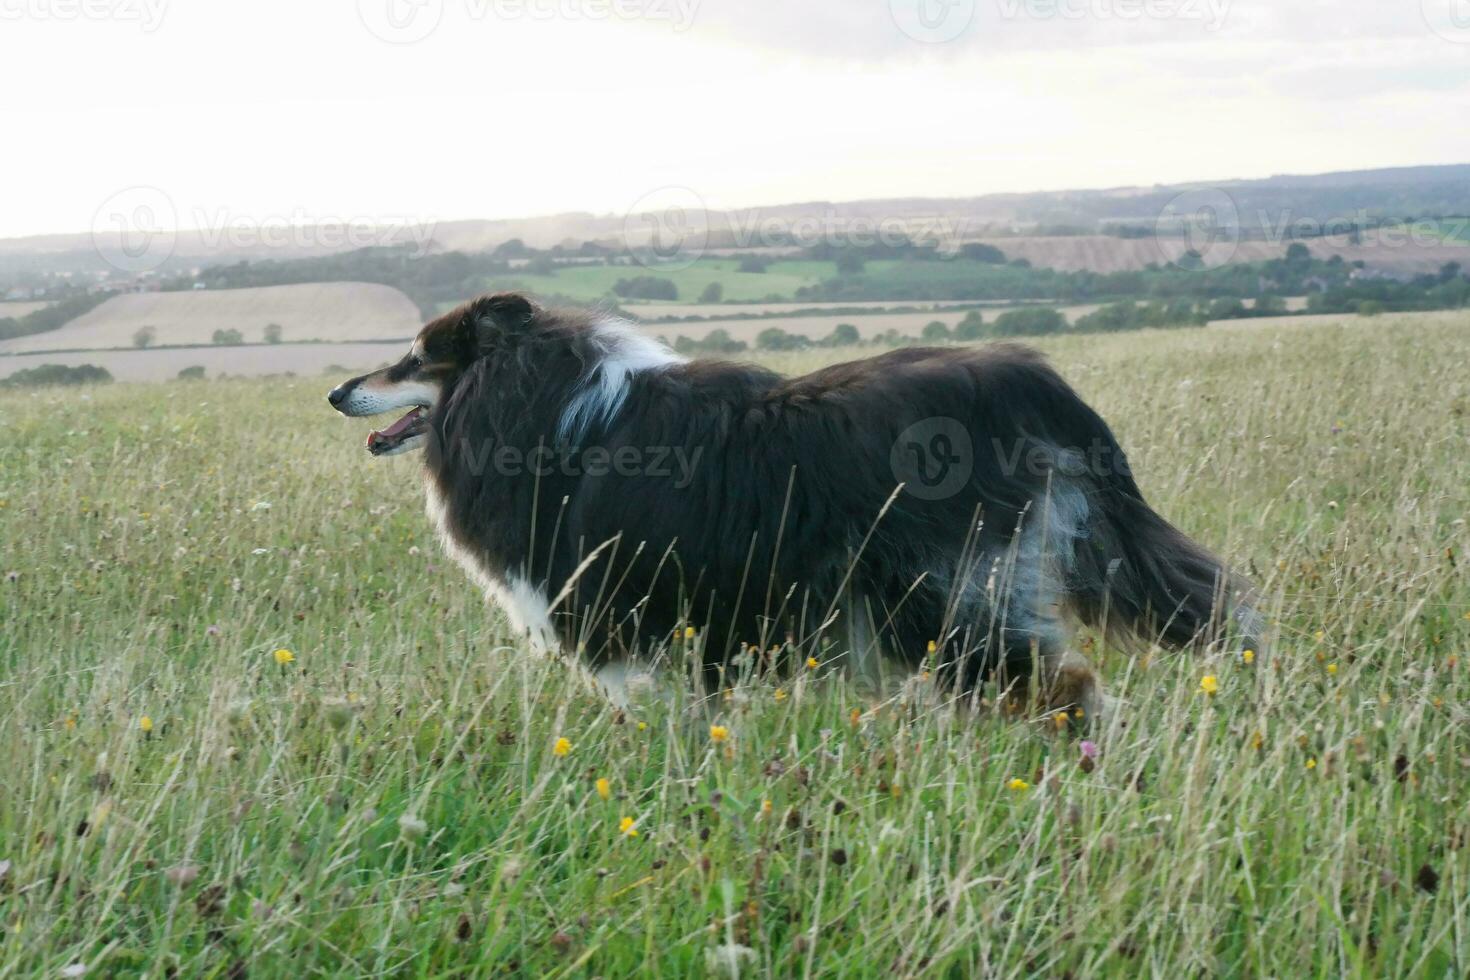 Black and White Dog with Long Hairs on Evening Walk at Countryside of England UK photo